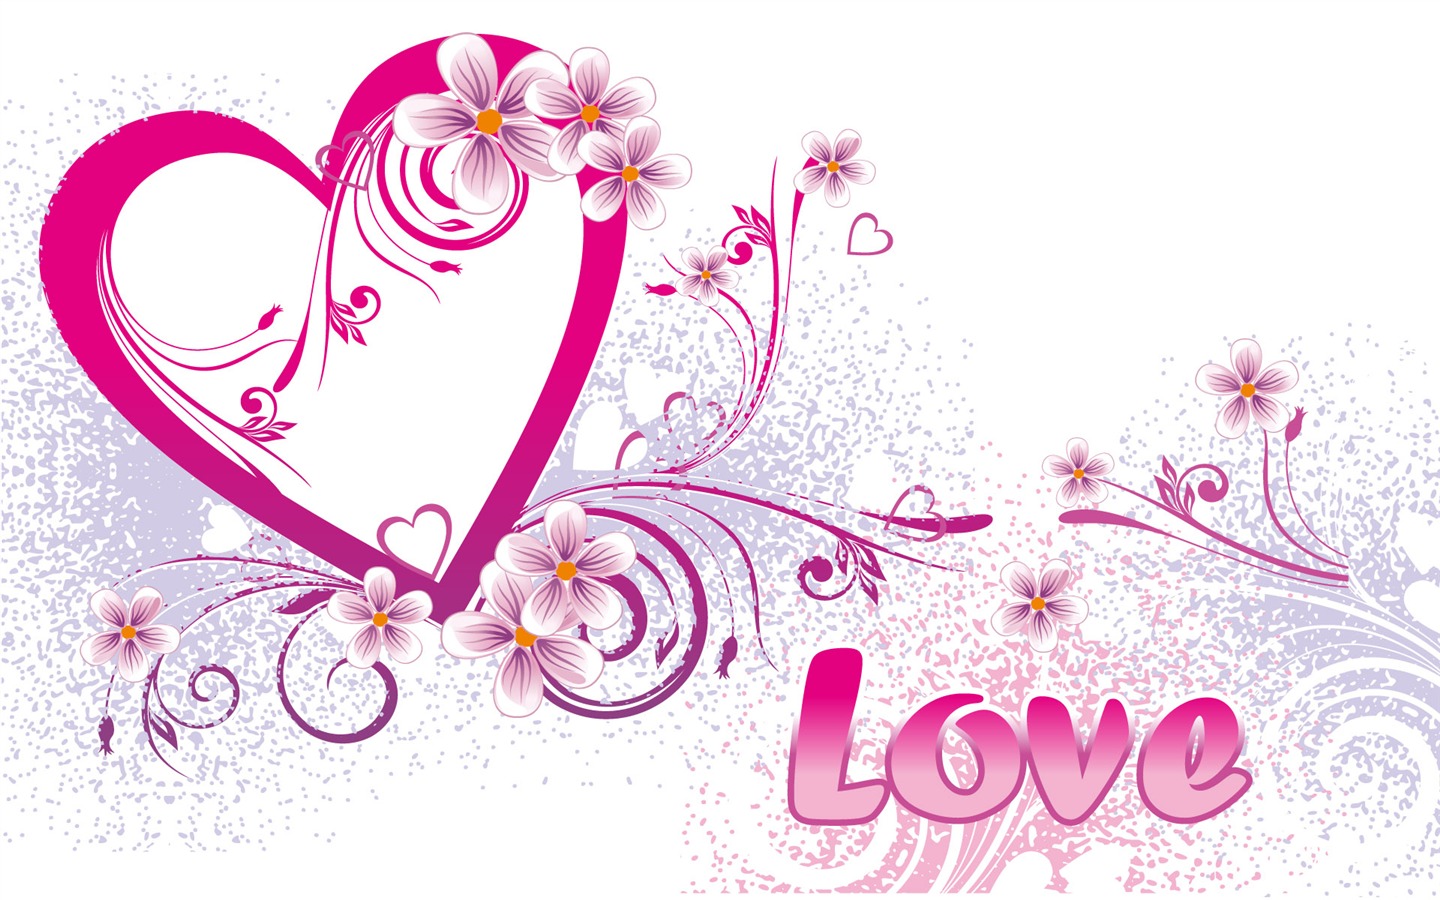 Valentine's Day Love Theme Wallpapers #26 - 1440x900